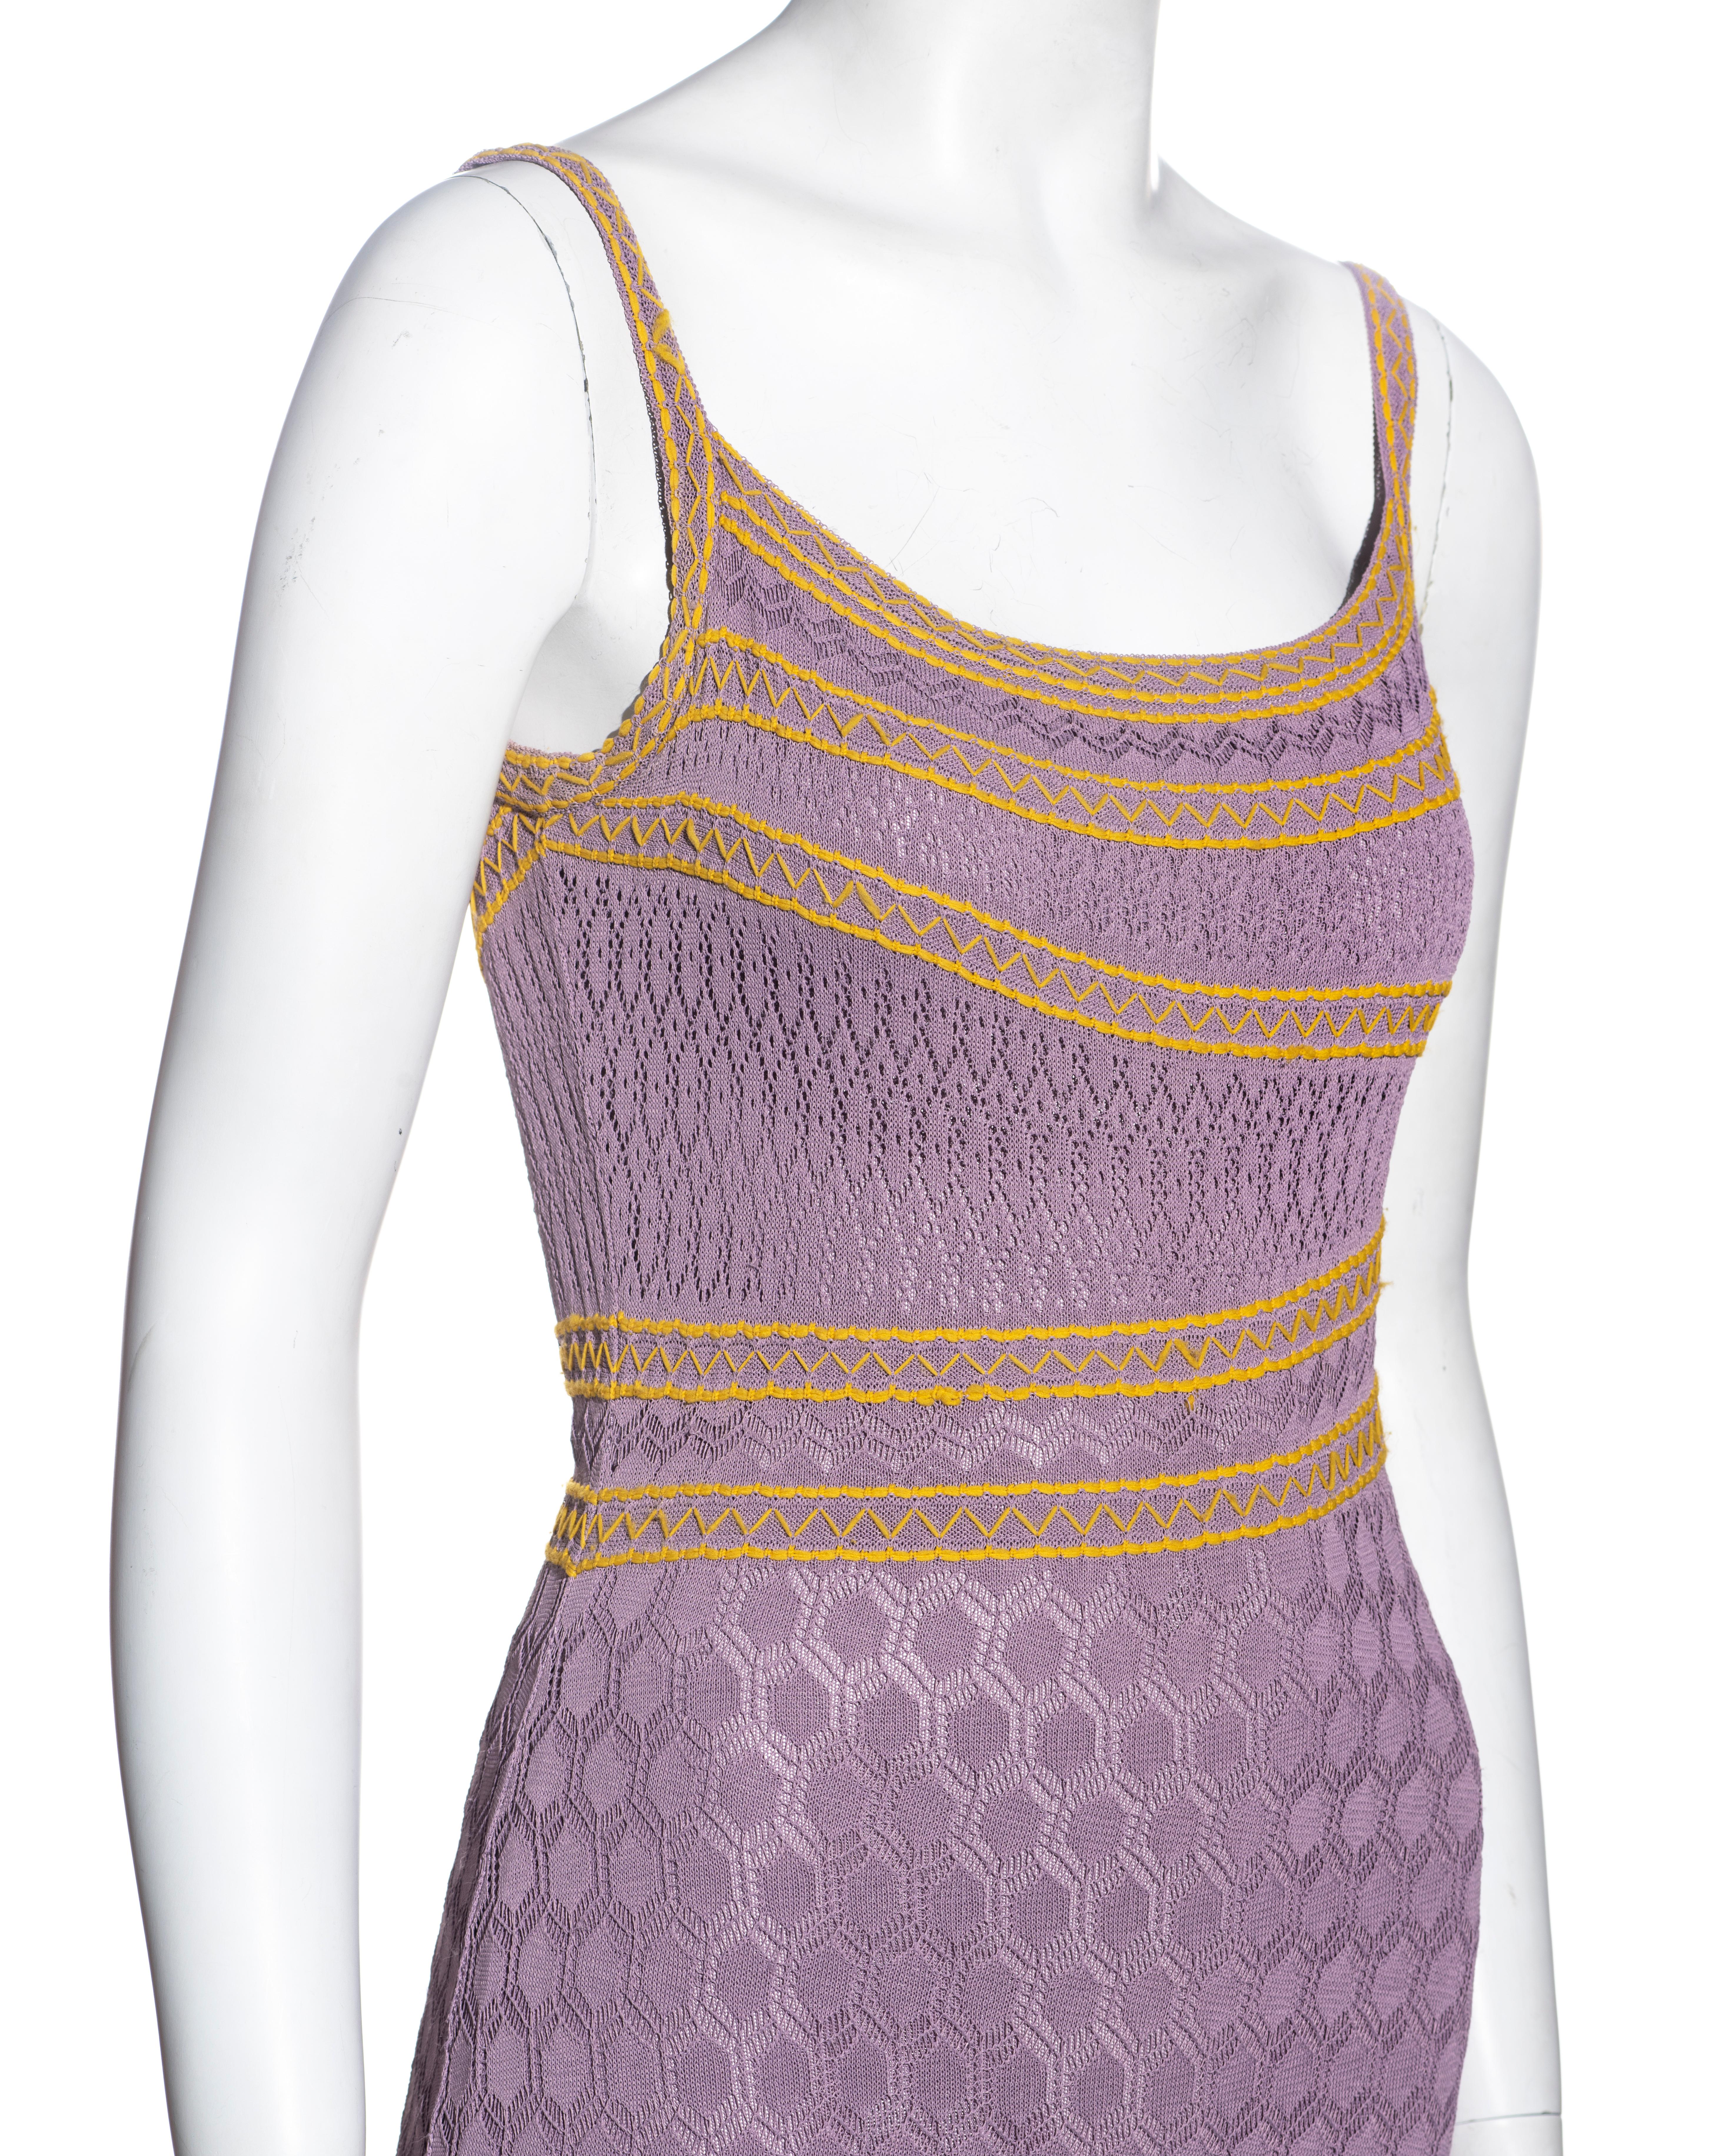 Christian Dior by John Galliano lavender crochet lace maxi dress, ss 2000 In Excellent Condition For Sale In London, GB